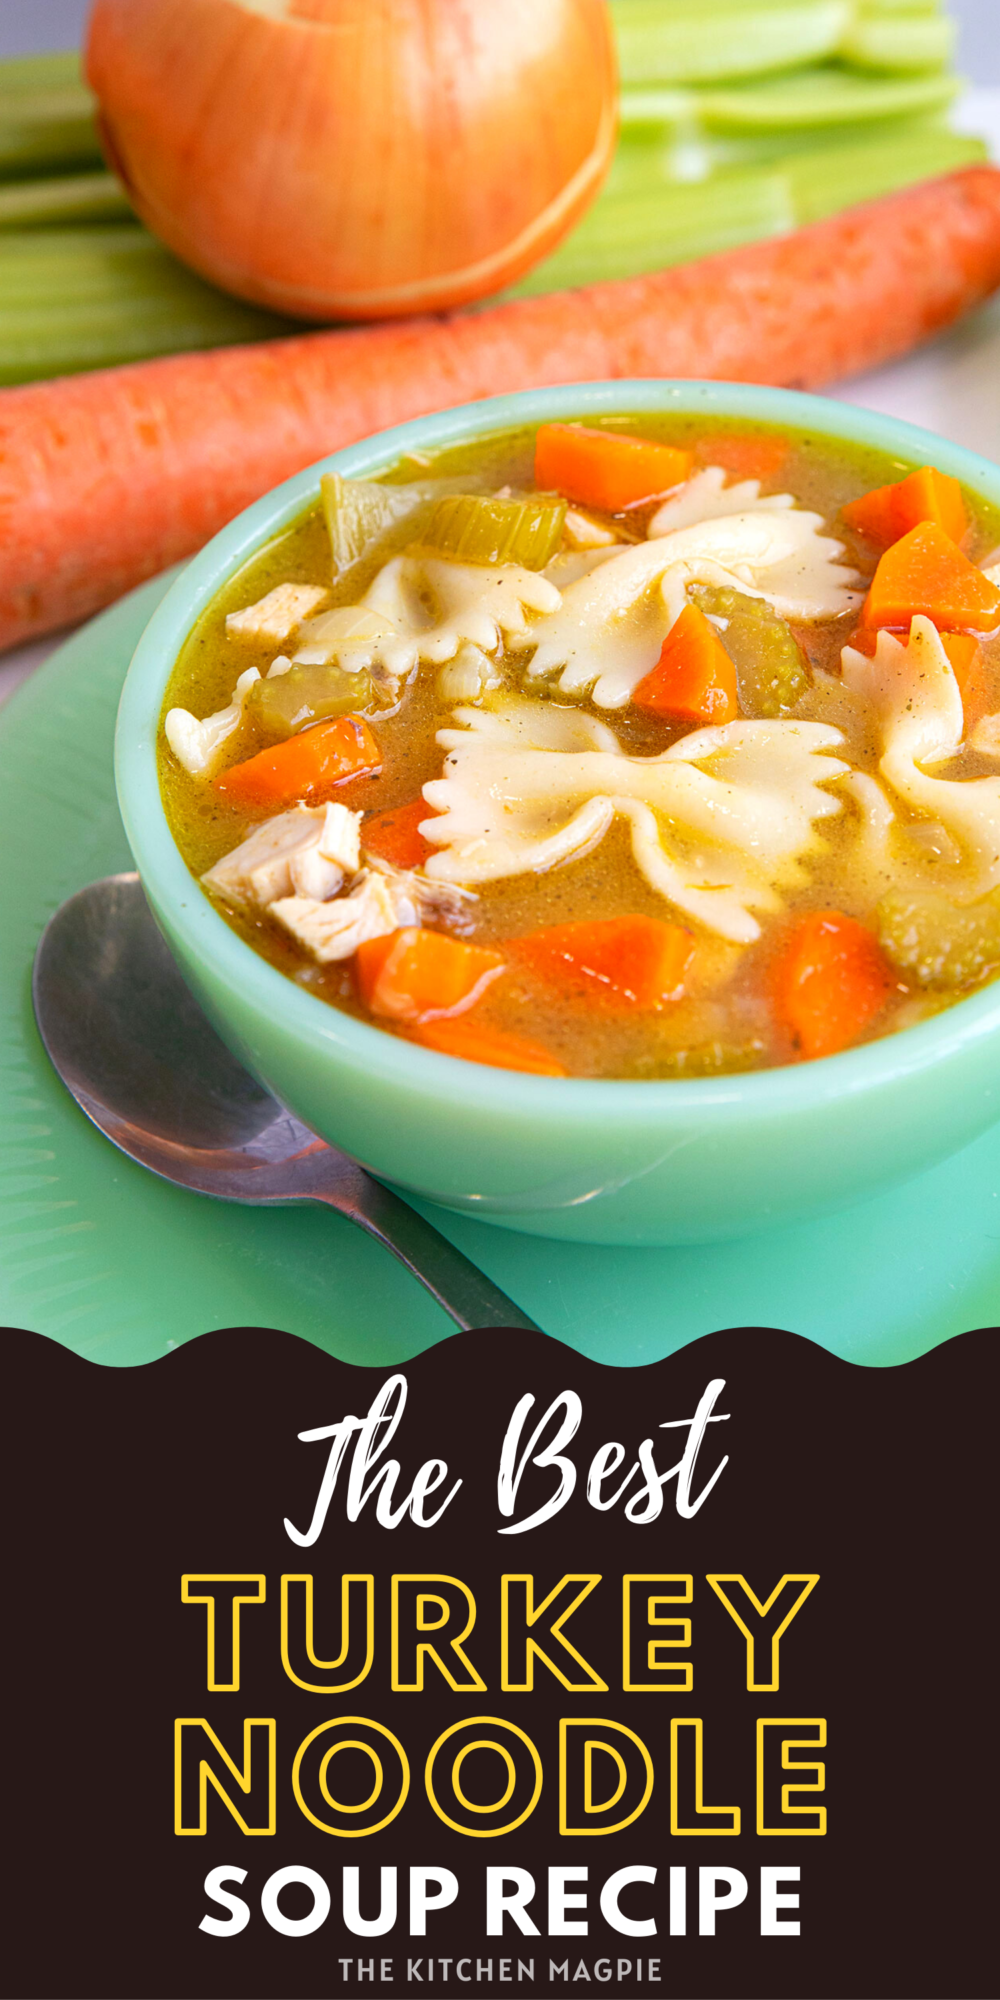 The best turkey noodle soup! Flavorful homemade turkey stock, tender vegetables and bowtie noodles make this a hit with the whole family!